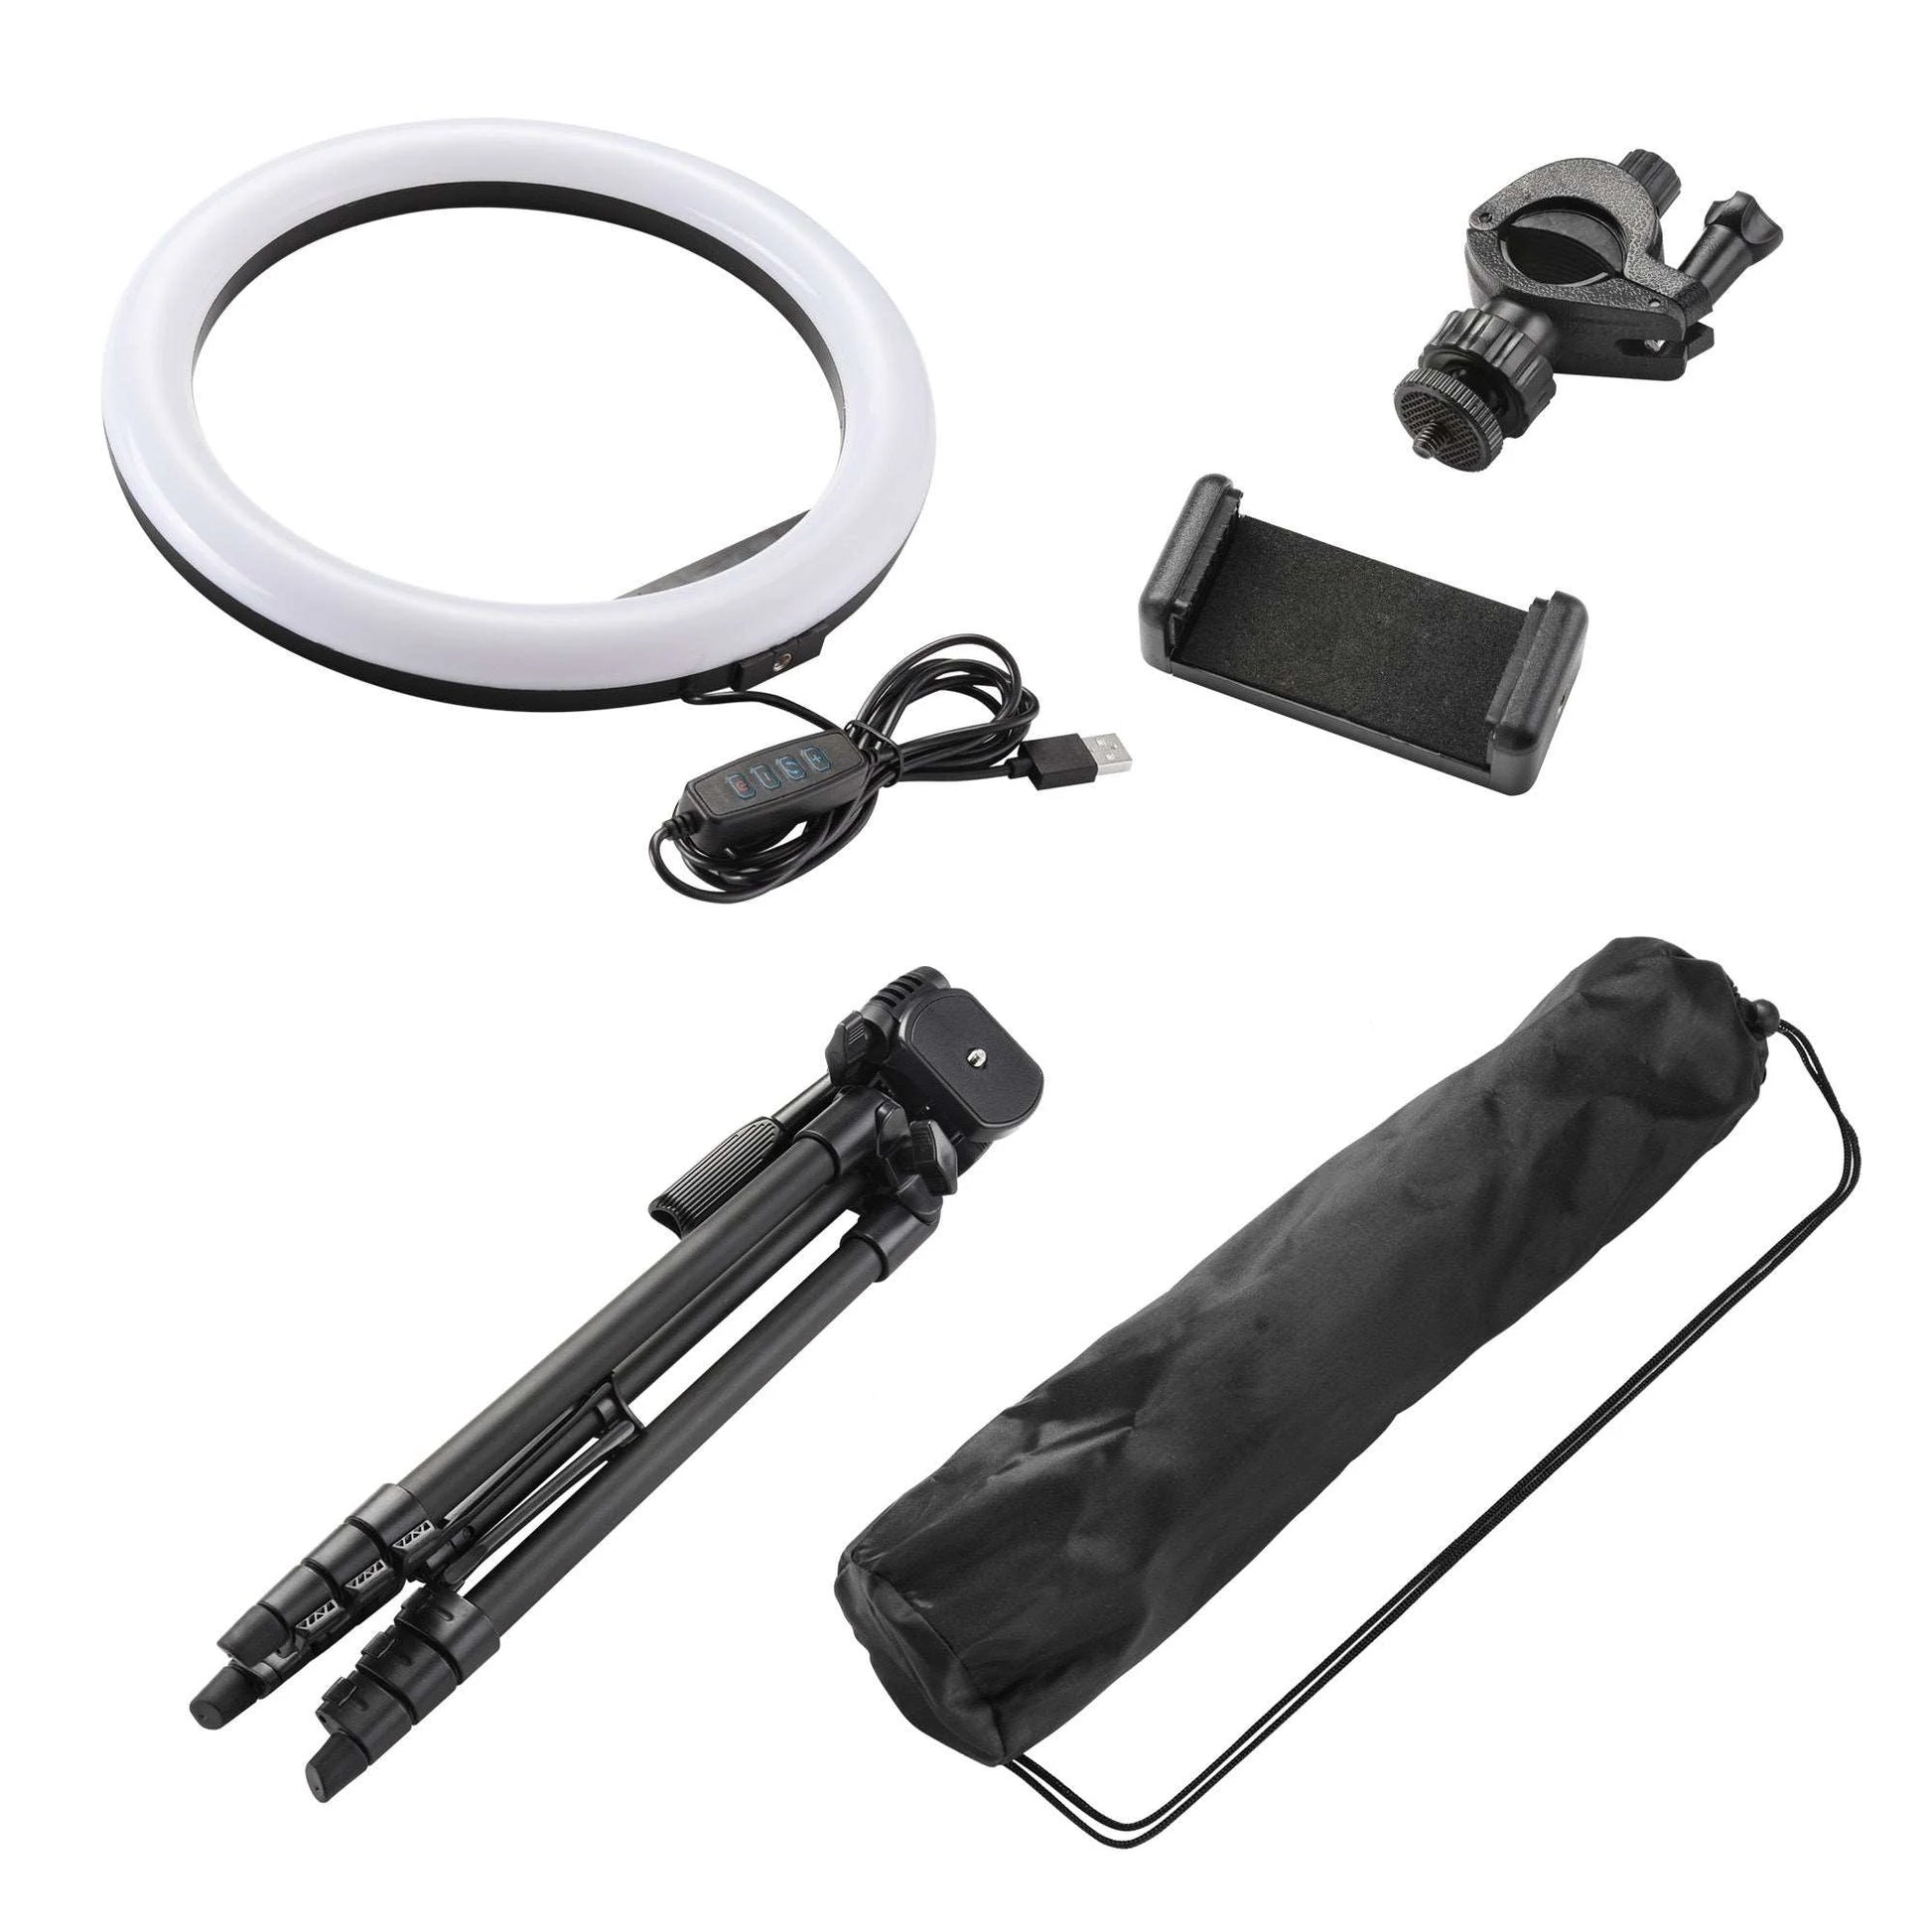 10'' Ring Light W/Phone Mount LED Dimmable 360° Adjustable Light by Lmyg